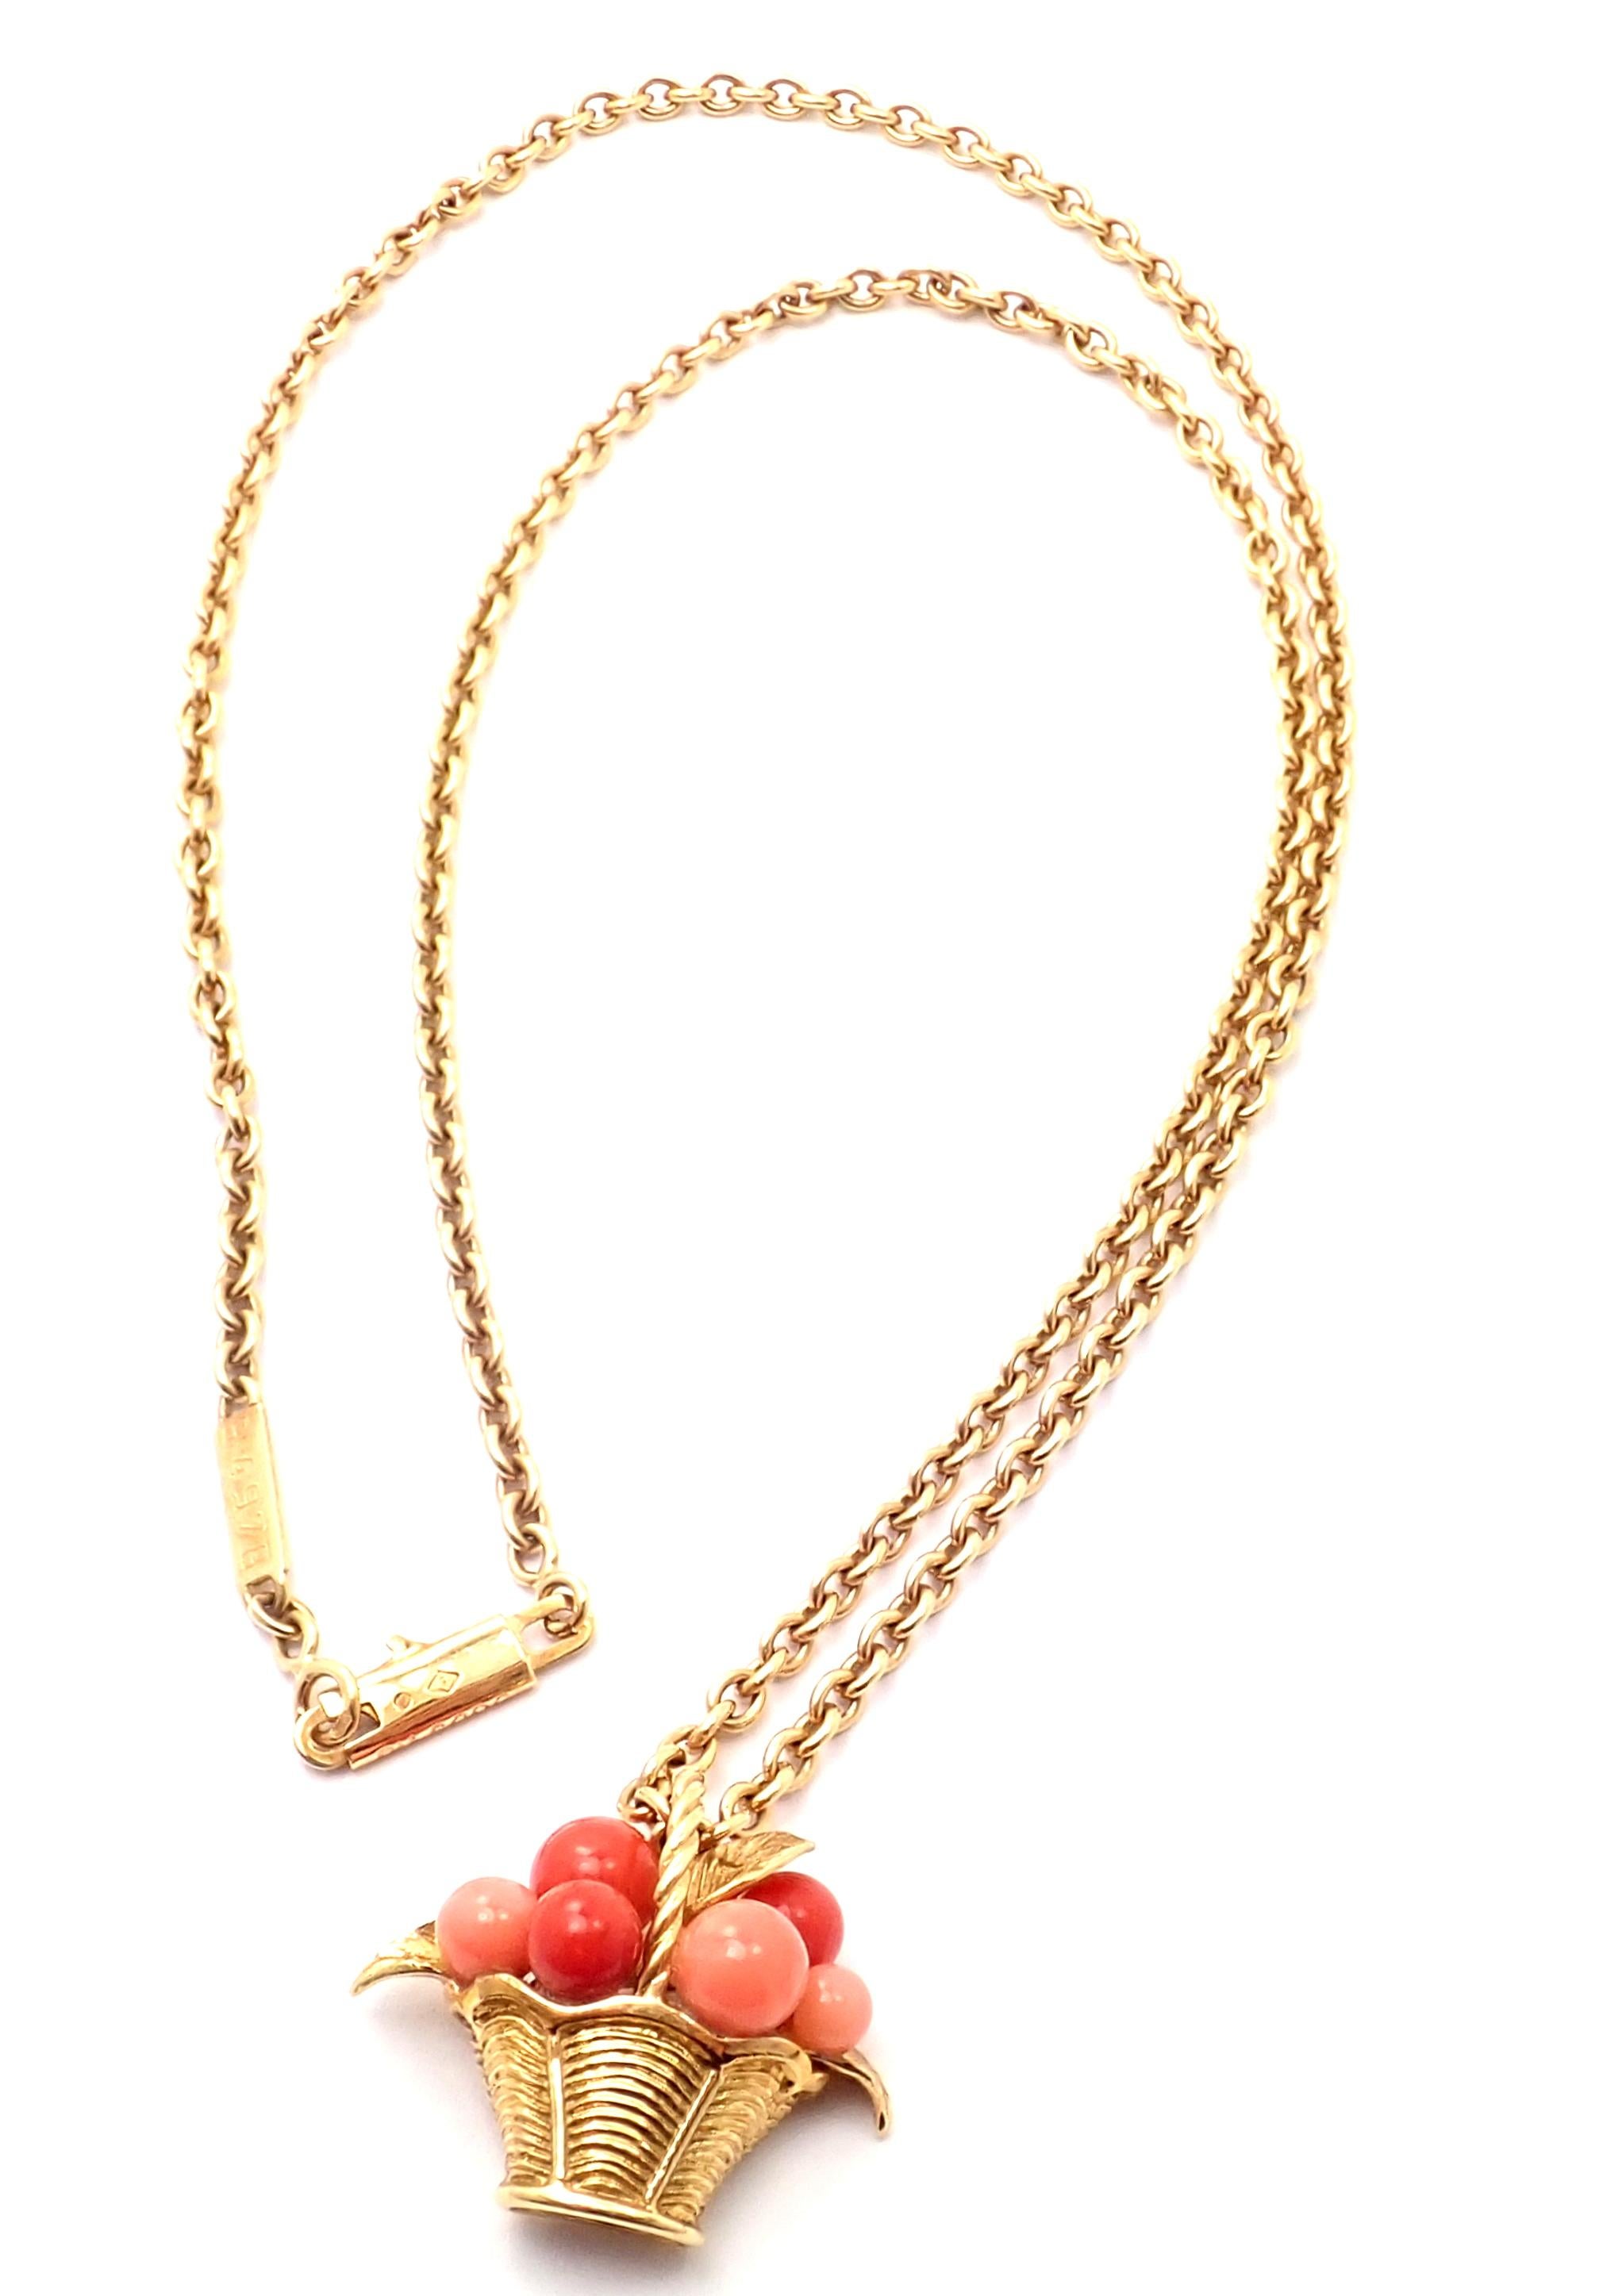 18k Yellow Gold Coral Bead Fruit Pendant Necklace by Van Cleef & Arpels.
With 6 round coral beads
Details: 
Measurements: Length: 18